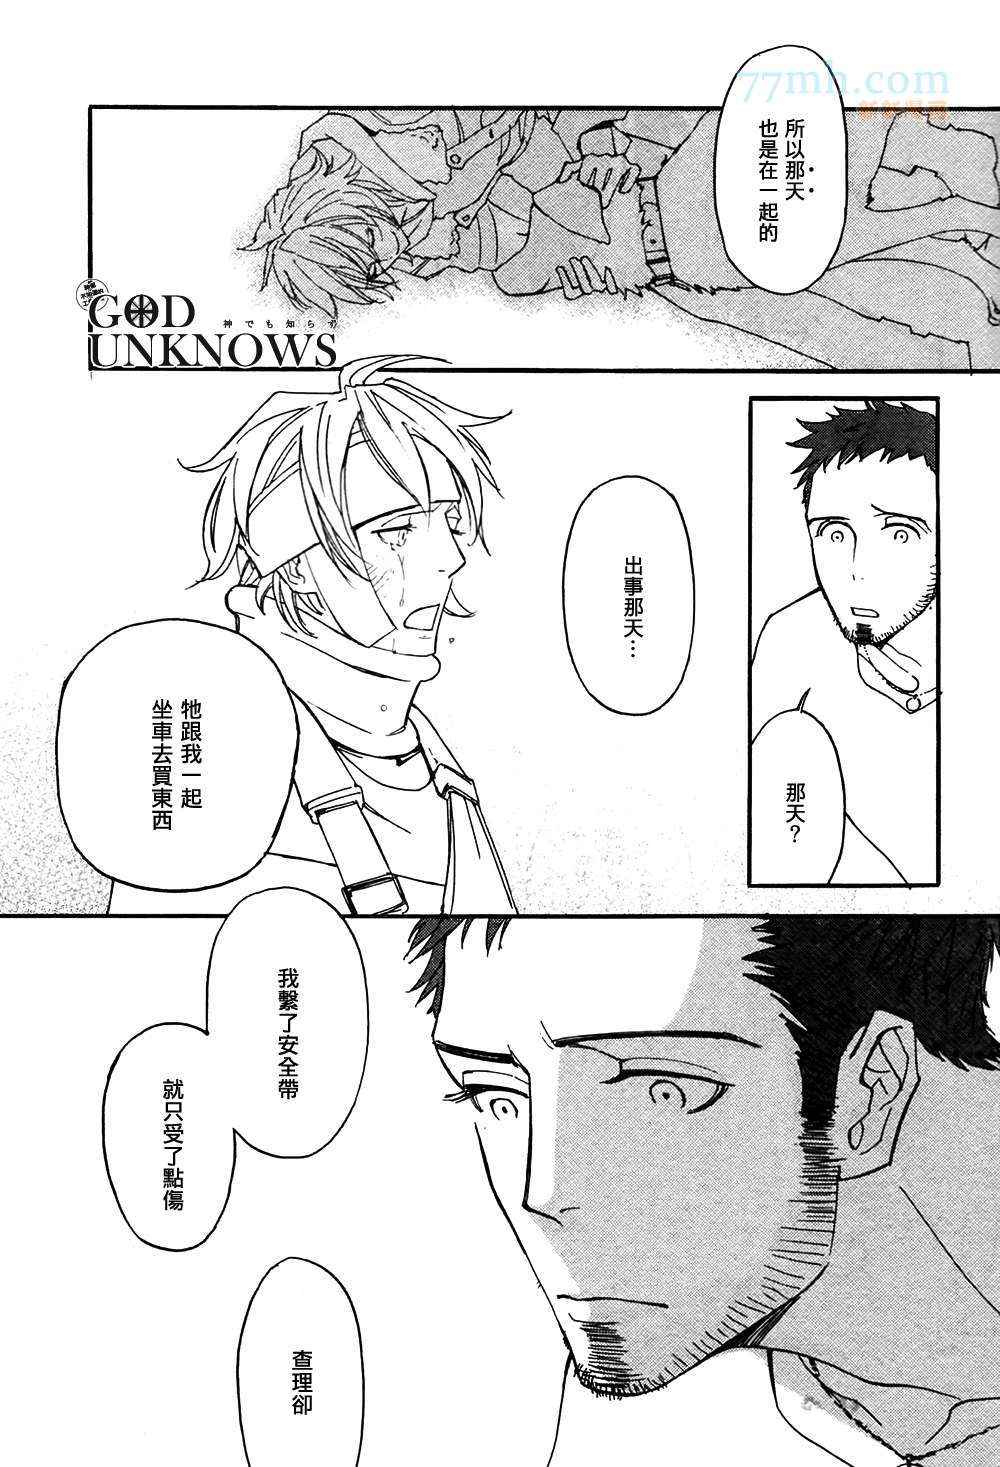 《Lost and Found》漫画 Found 003集